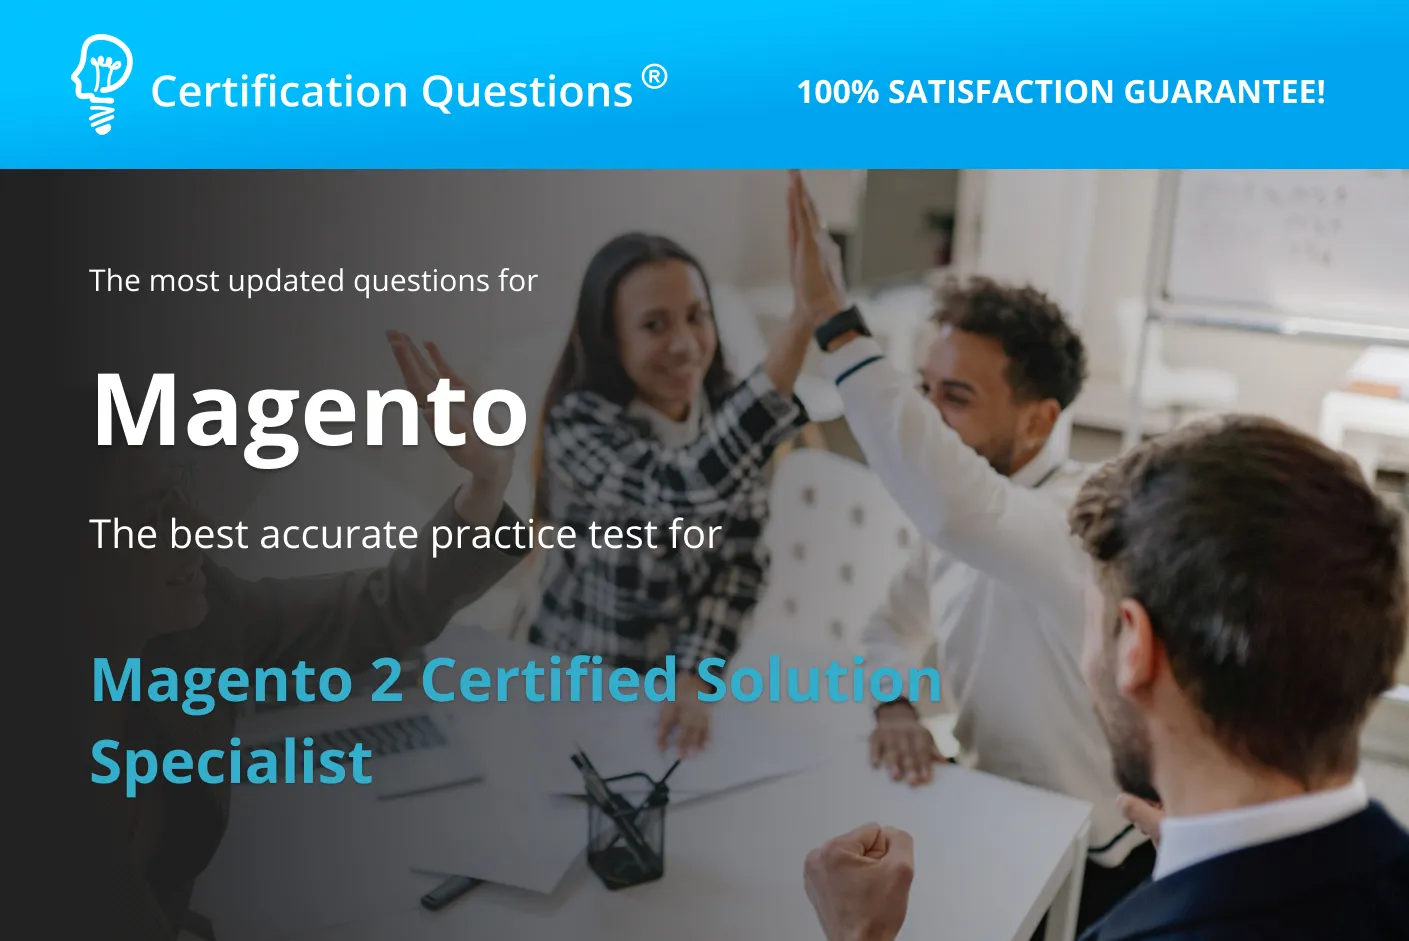 This image is related to magento 2 certified solution specialist